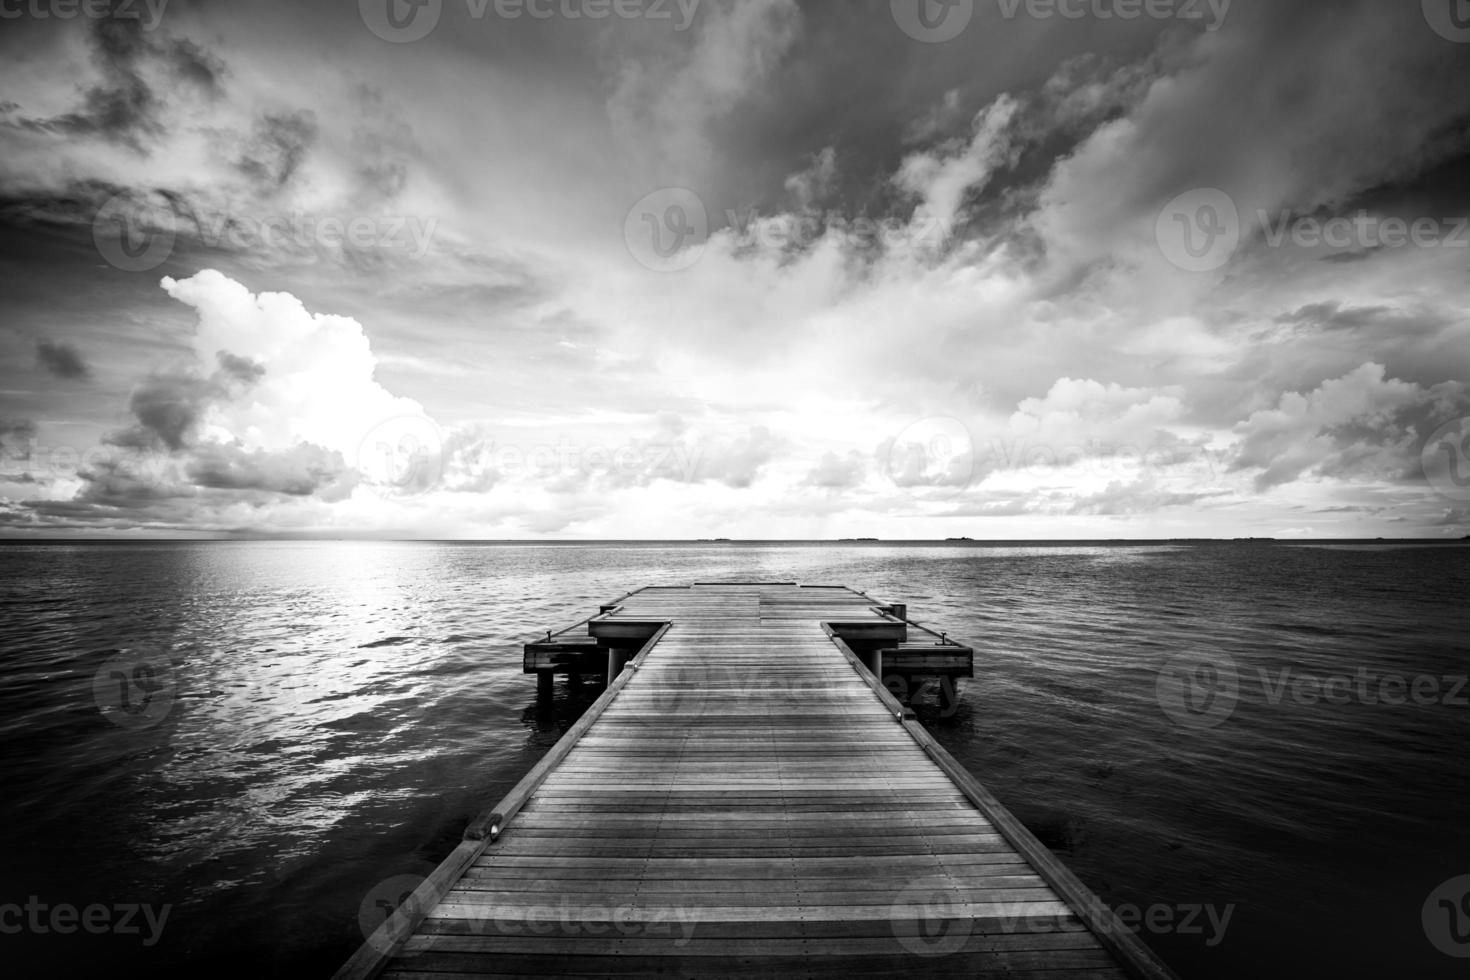 Black and white monochrome wooden jetty over shallow sea. Concept of alone sadness walk to nowhere without destination and no one help guide the way photo